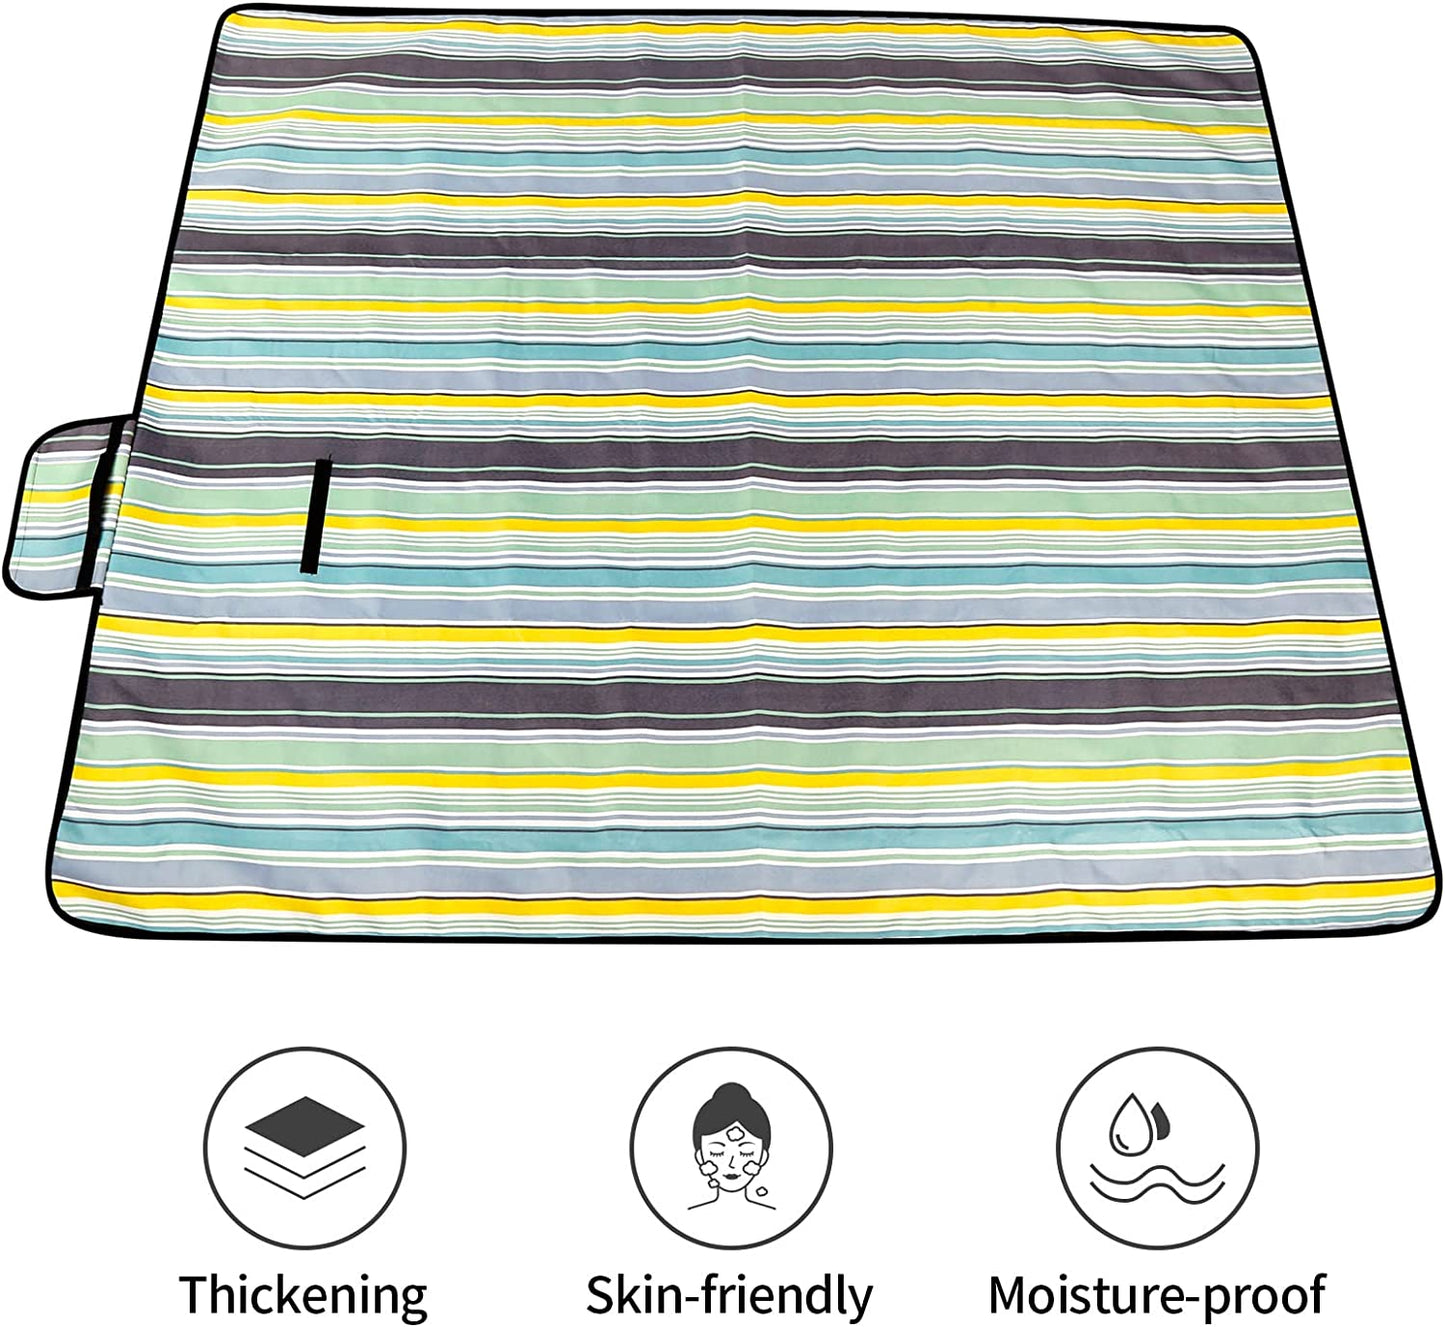 UNICOO Extra Large Outdoor Picnic Blankets, Sandproof & Waterproof Foldable Blankets for Beach, Park, Camping on Grass Picnic Blankets